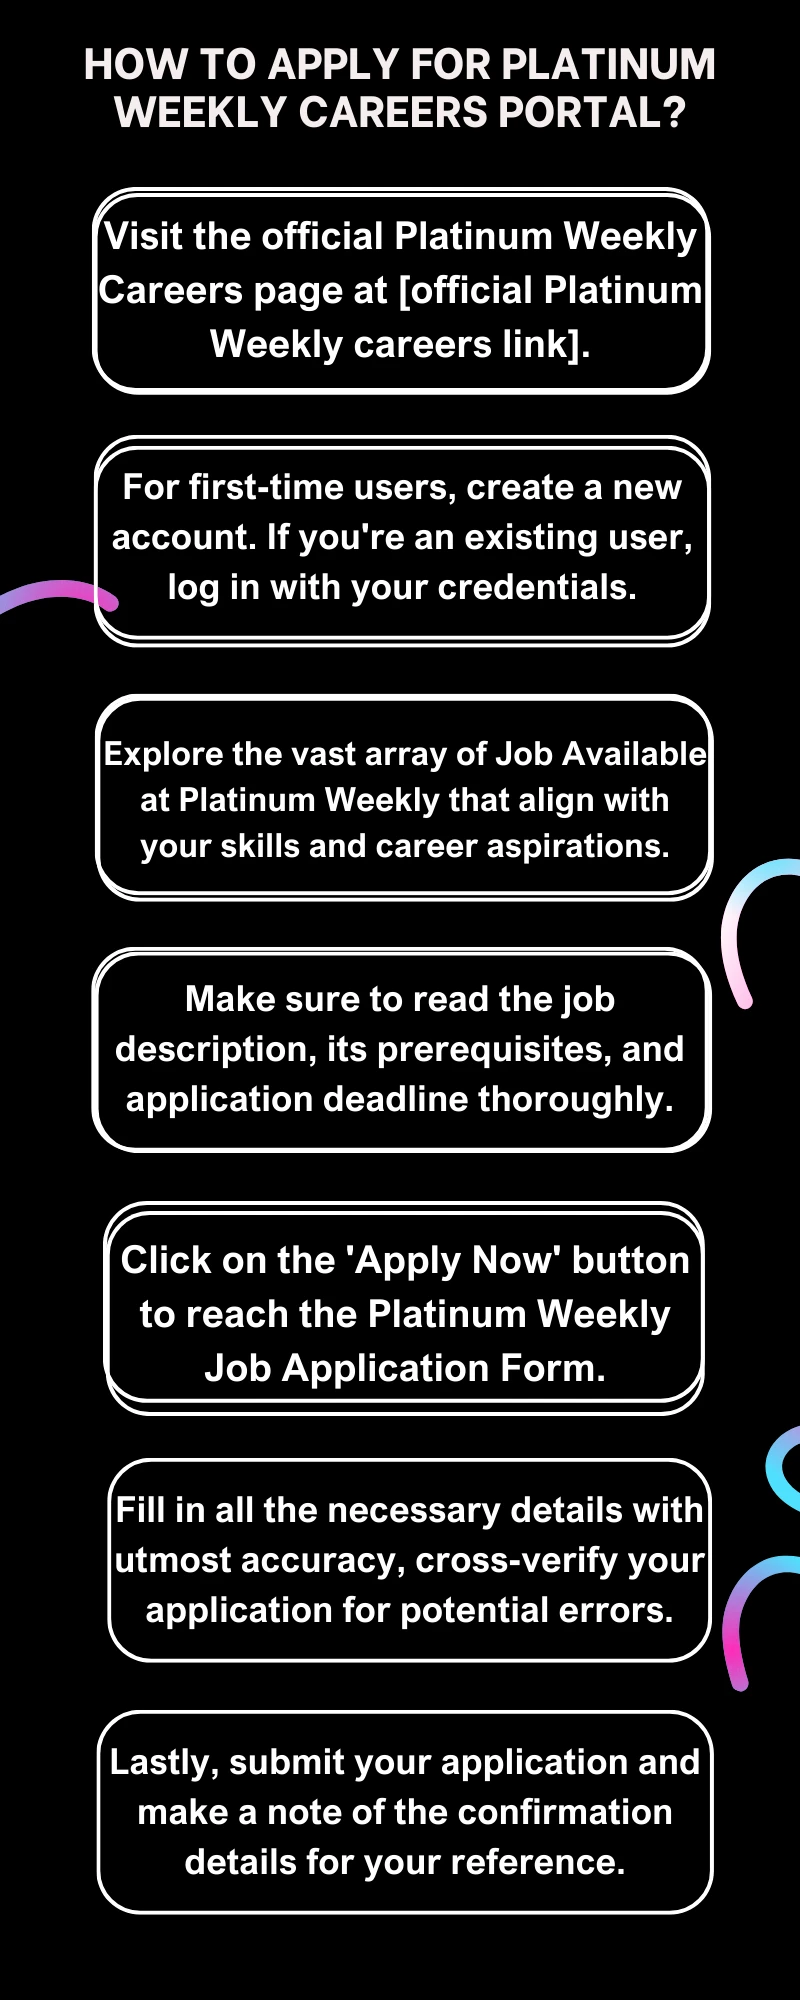 How To Apply for Platinum weekly Careers Portal?